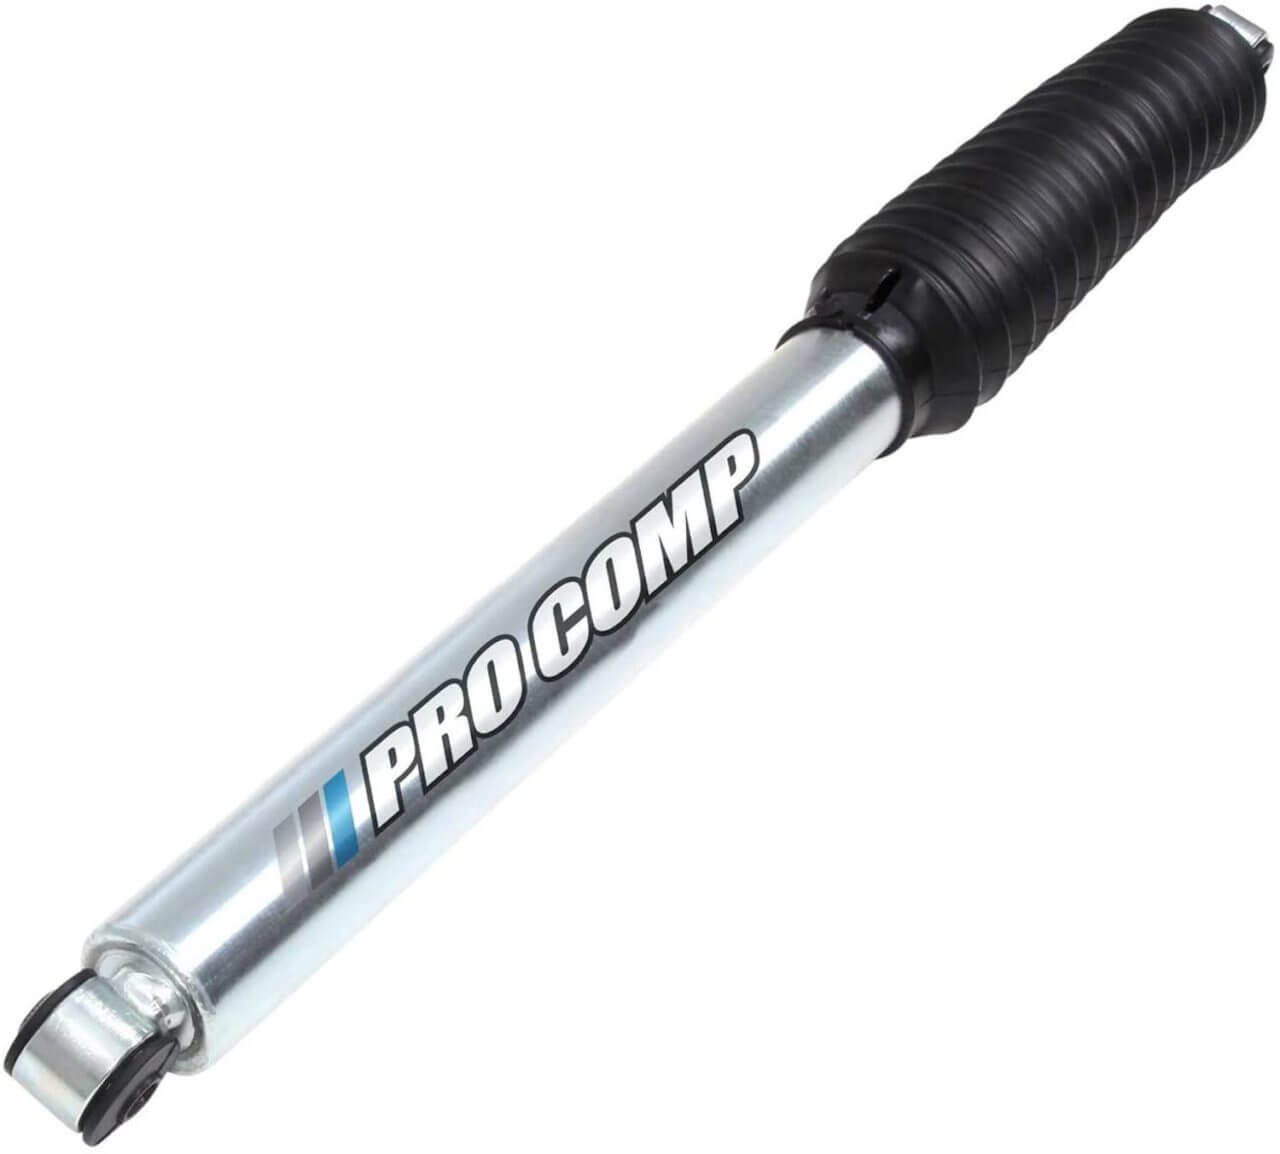 06 Pro Comp Aftermarket Gas Charged Shocks Rain Stability